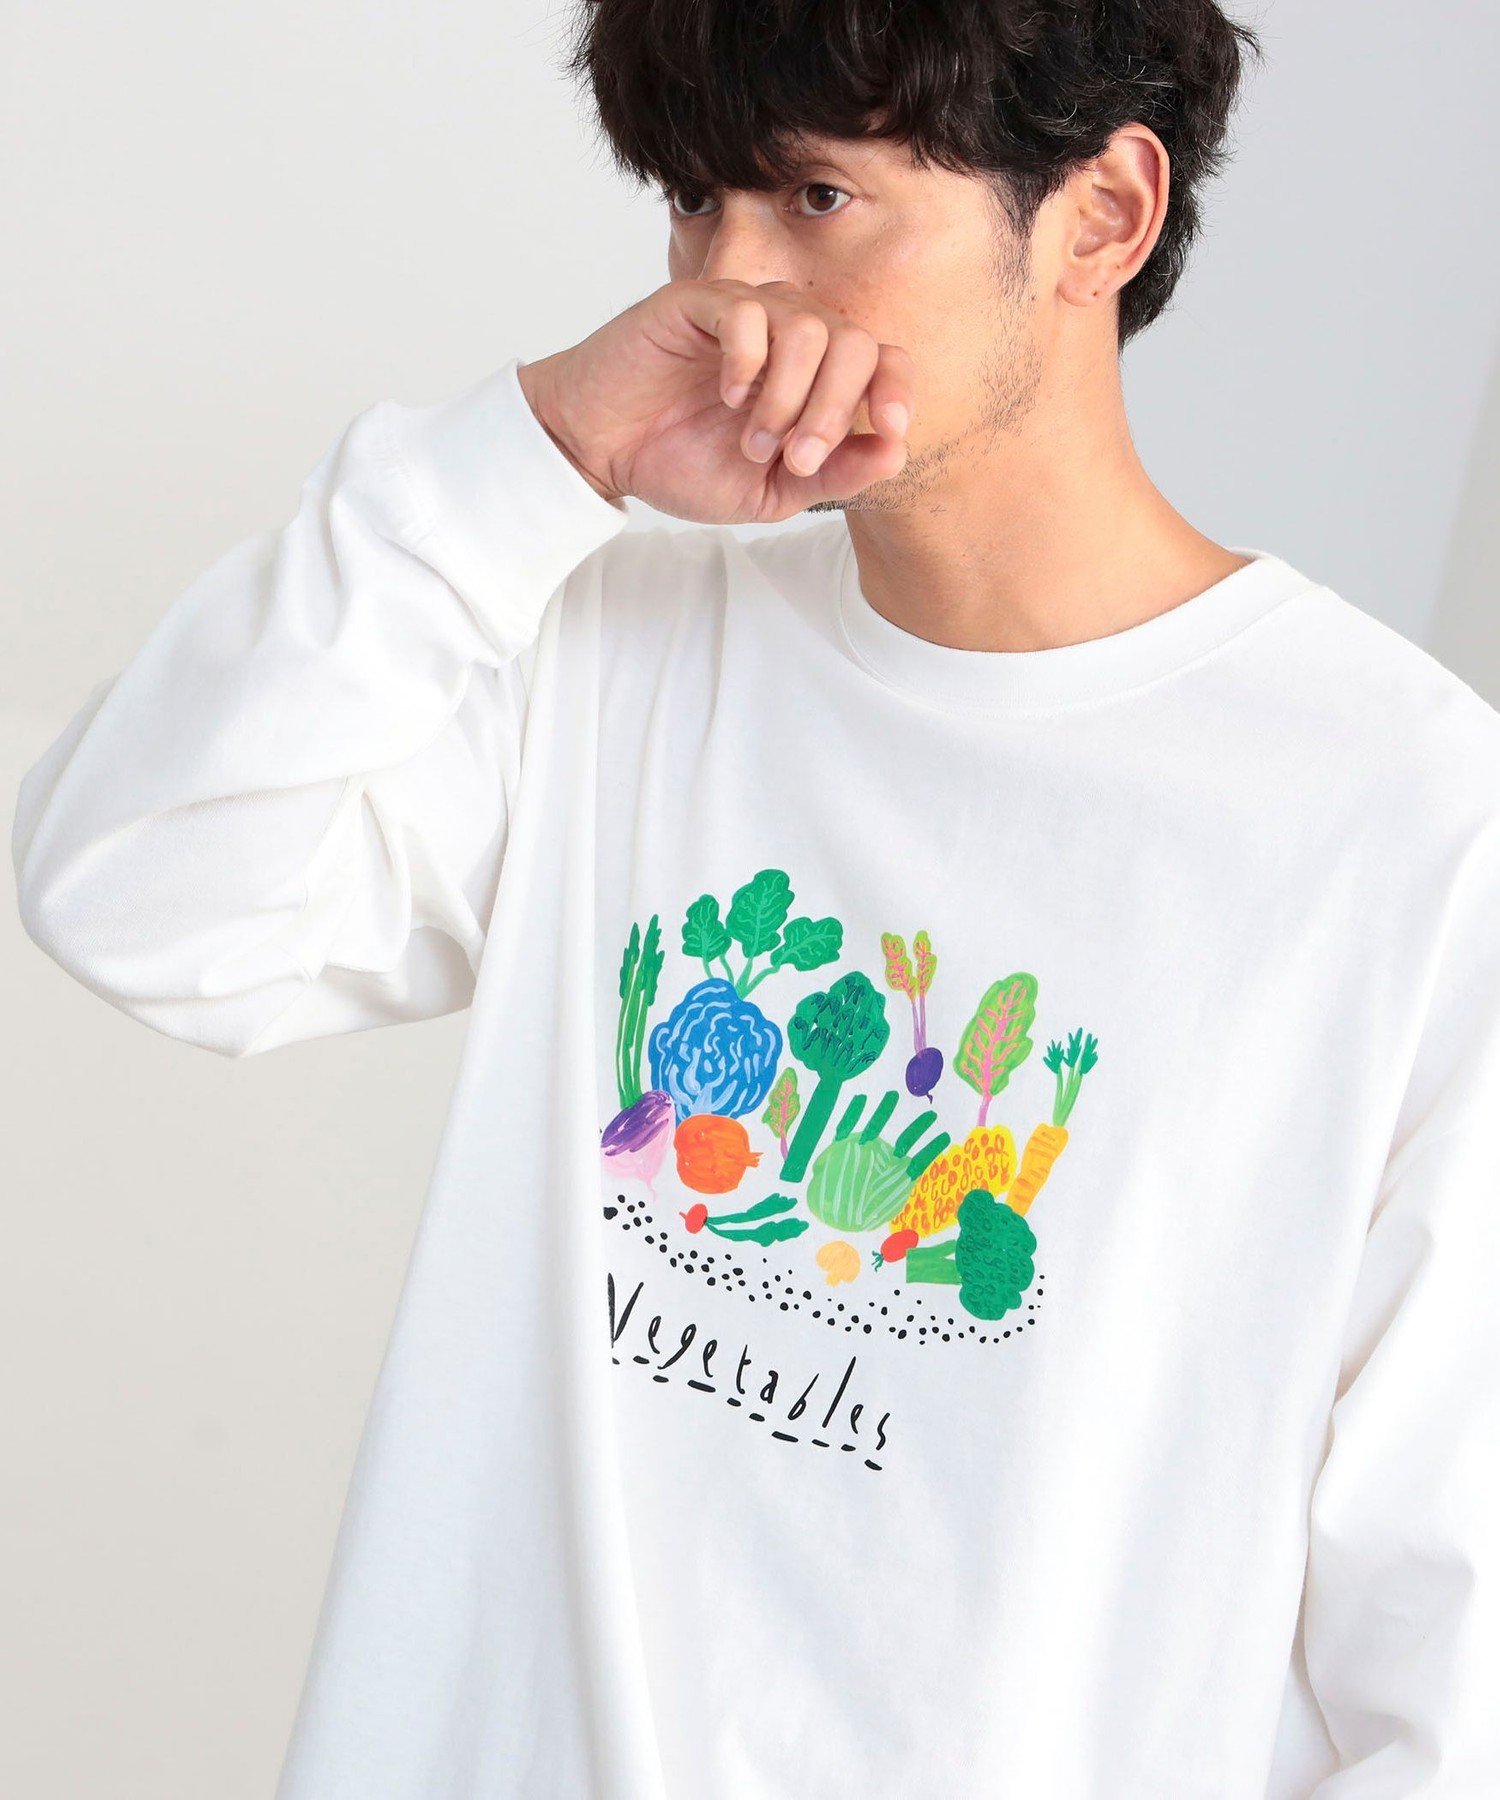 【SALE／60 OFF】B:MING by BEAMS B:MING by BEAMS / イラストプリント カットソー by MASAMI ビームス アウトレット トップス カットソー Tシャツ